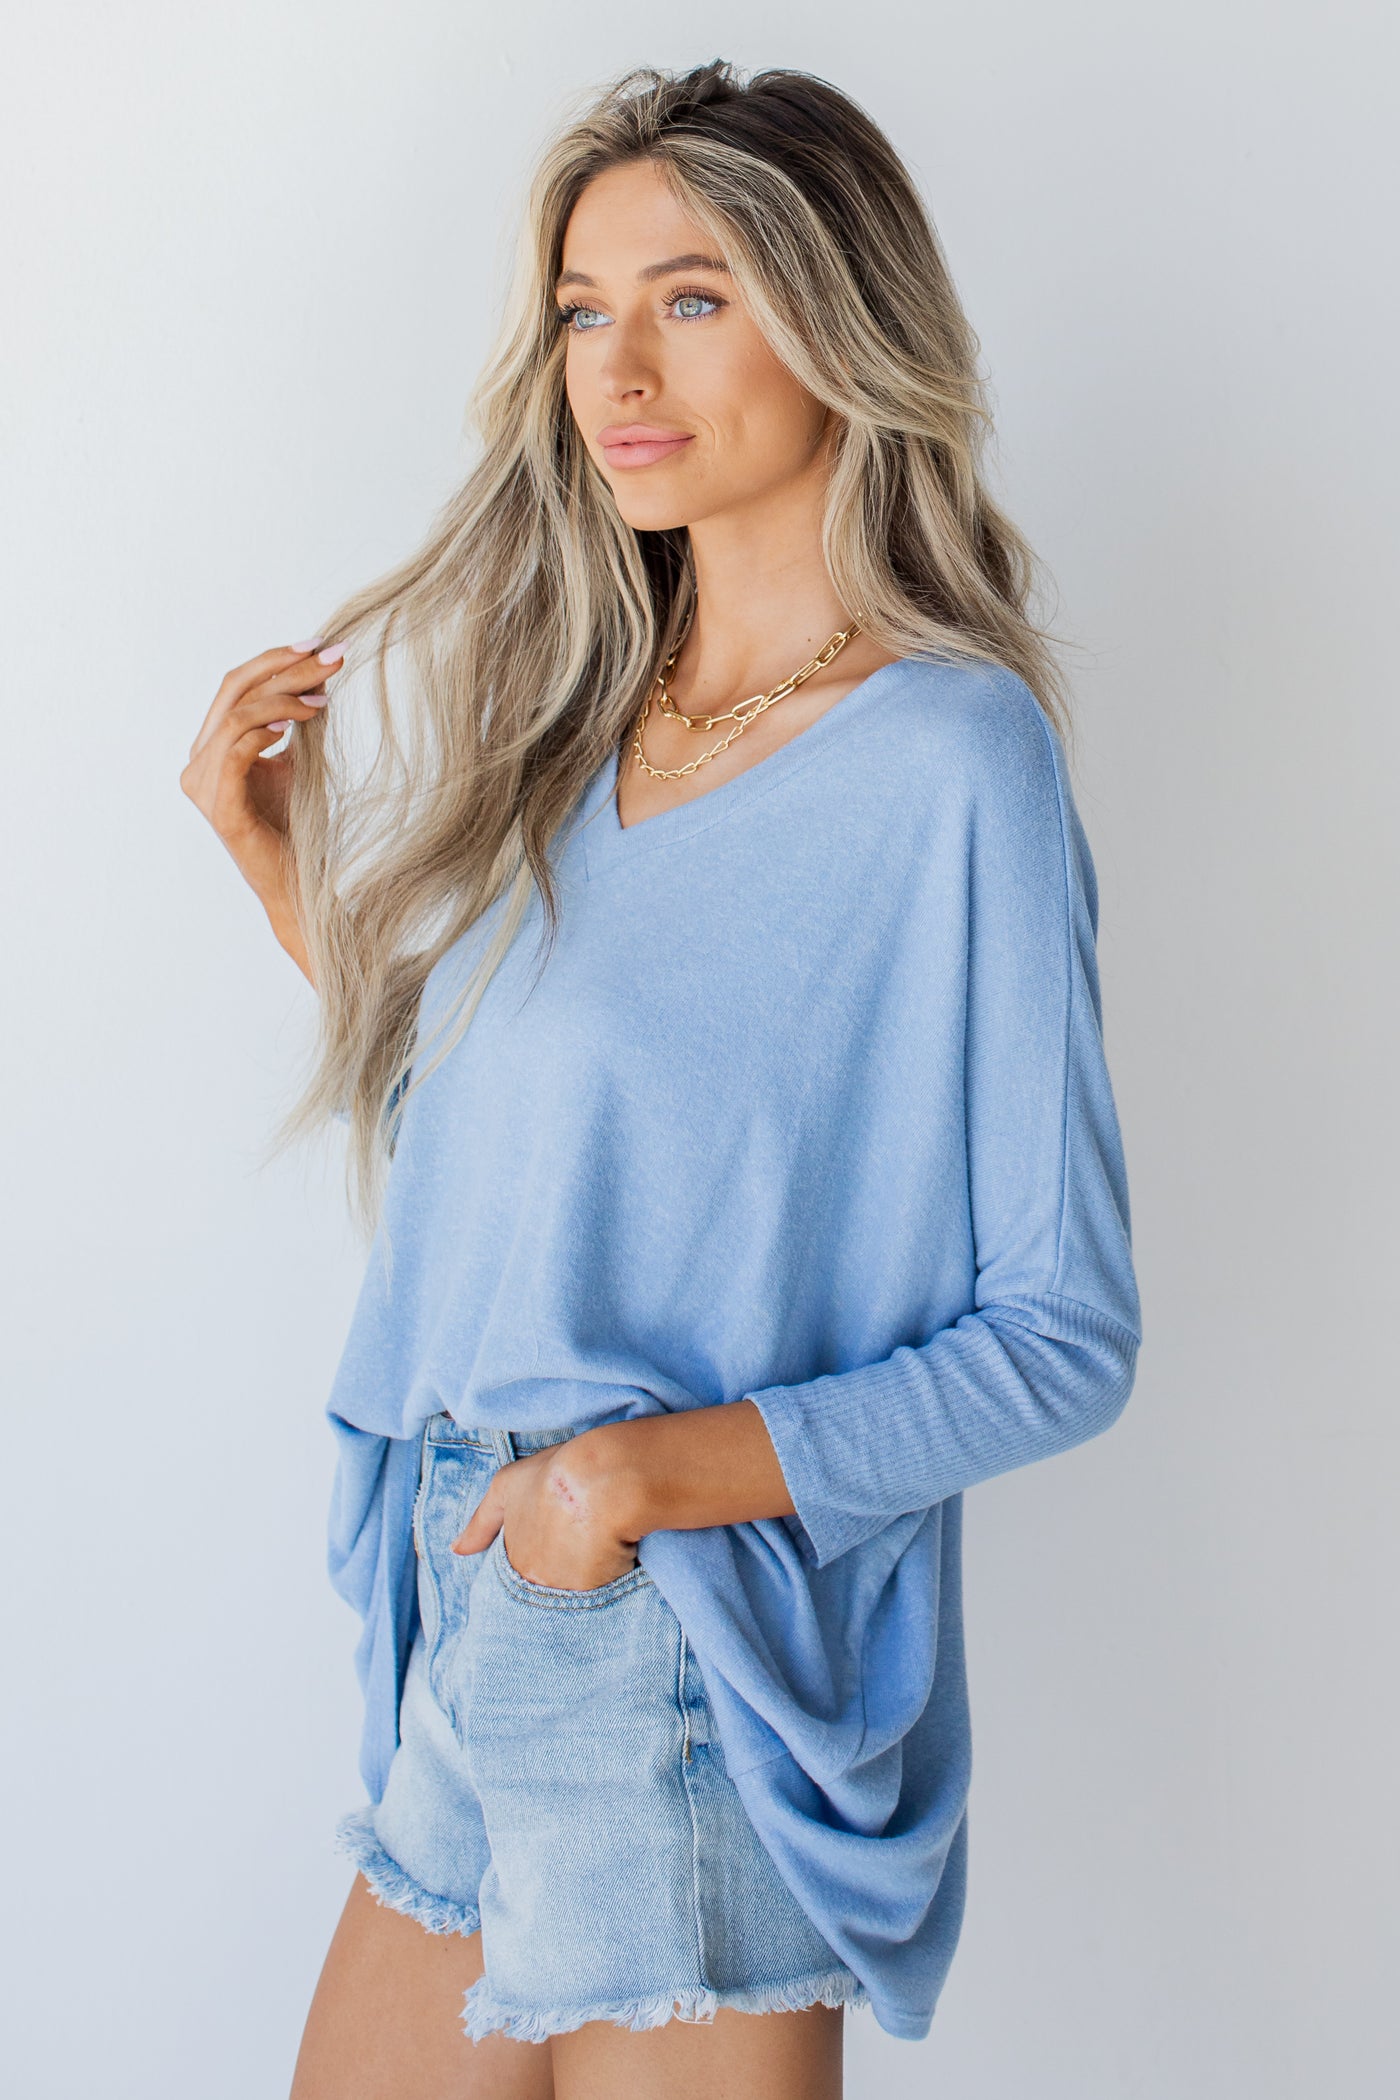 Brushed Knit Top in light blue side view